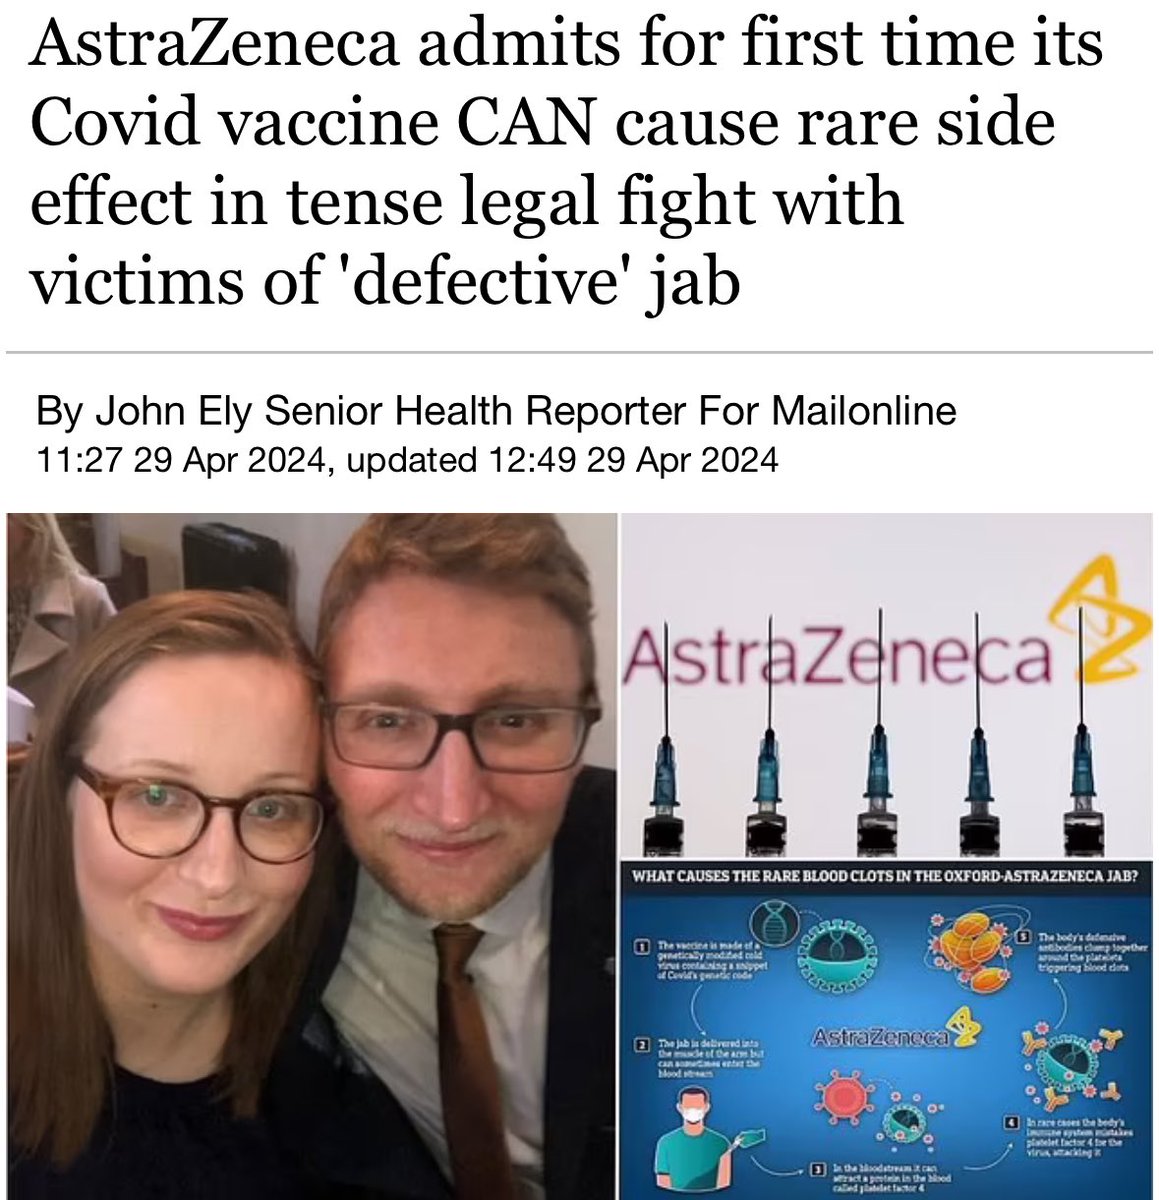 Remember when we called the vaxx, the 'clot shot' & they called us conspiracy theorists?? Well, #AstraZeneca finally admits in court, for the first time, that the #Covid vaccine is unsafe & results in BLOOD CLOTTING! #Fauci & ALL involved, including Big Pharma & their…